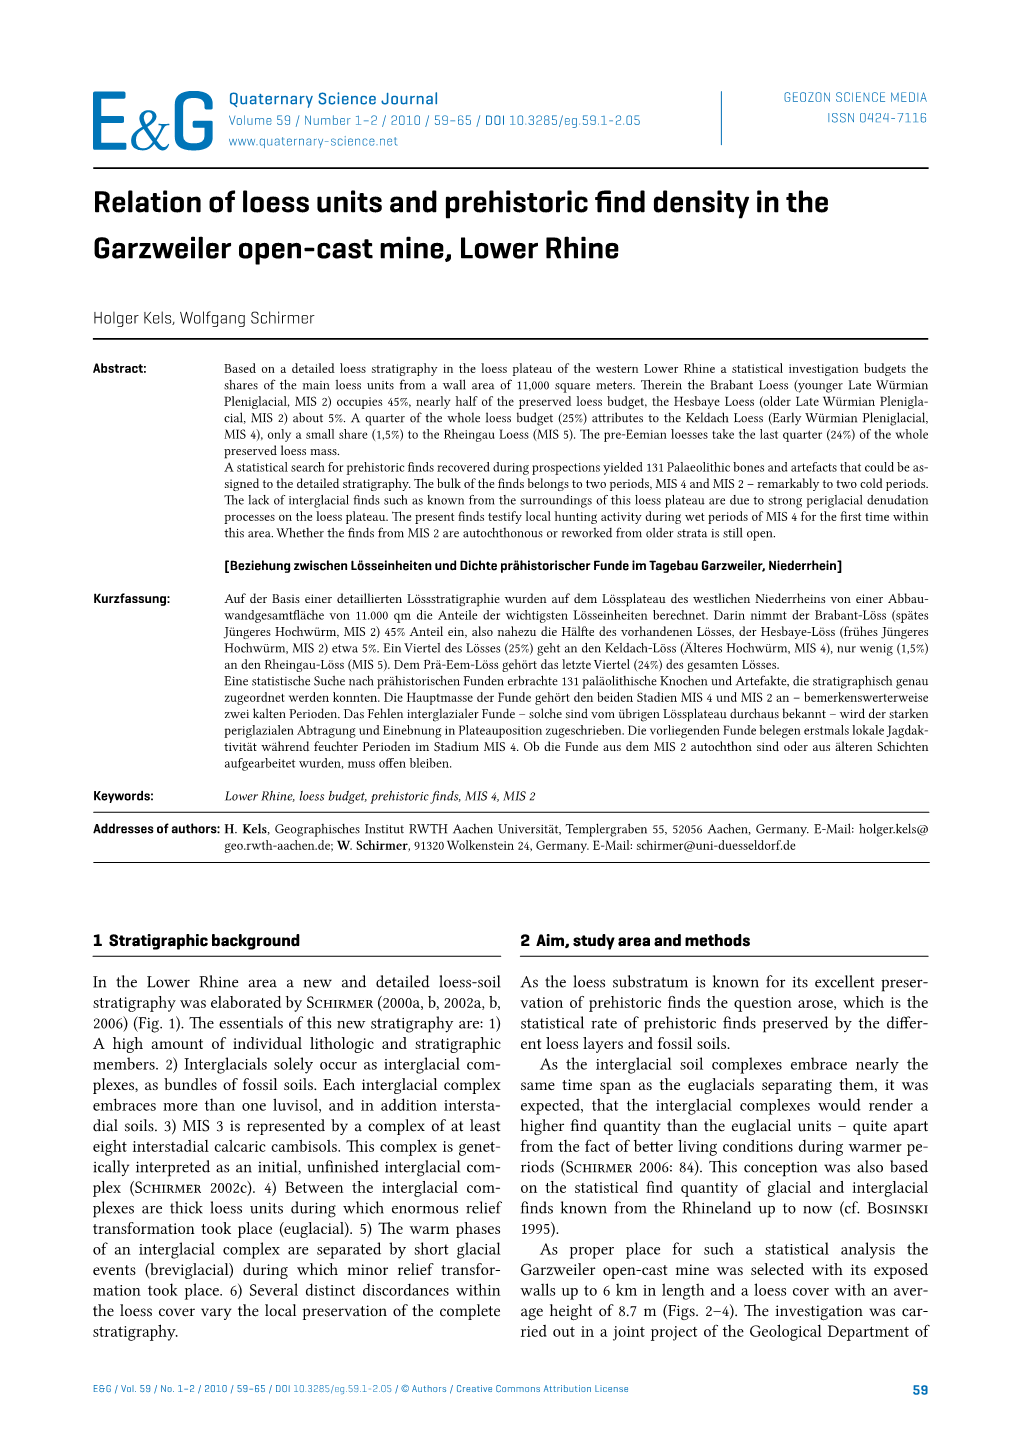 Relation of Loess Units and Prehistoric Find Density in the Garzweiler Open-Cast Mine, Lower Rhine